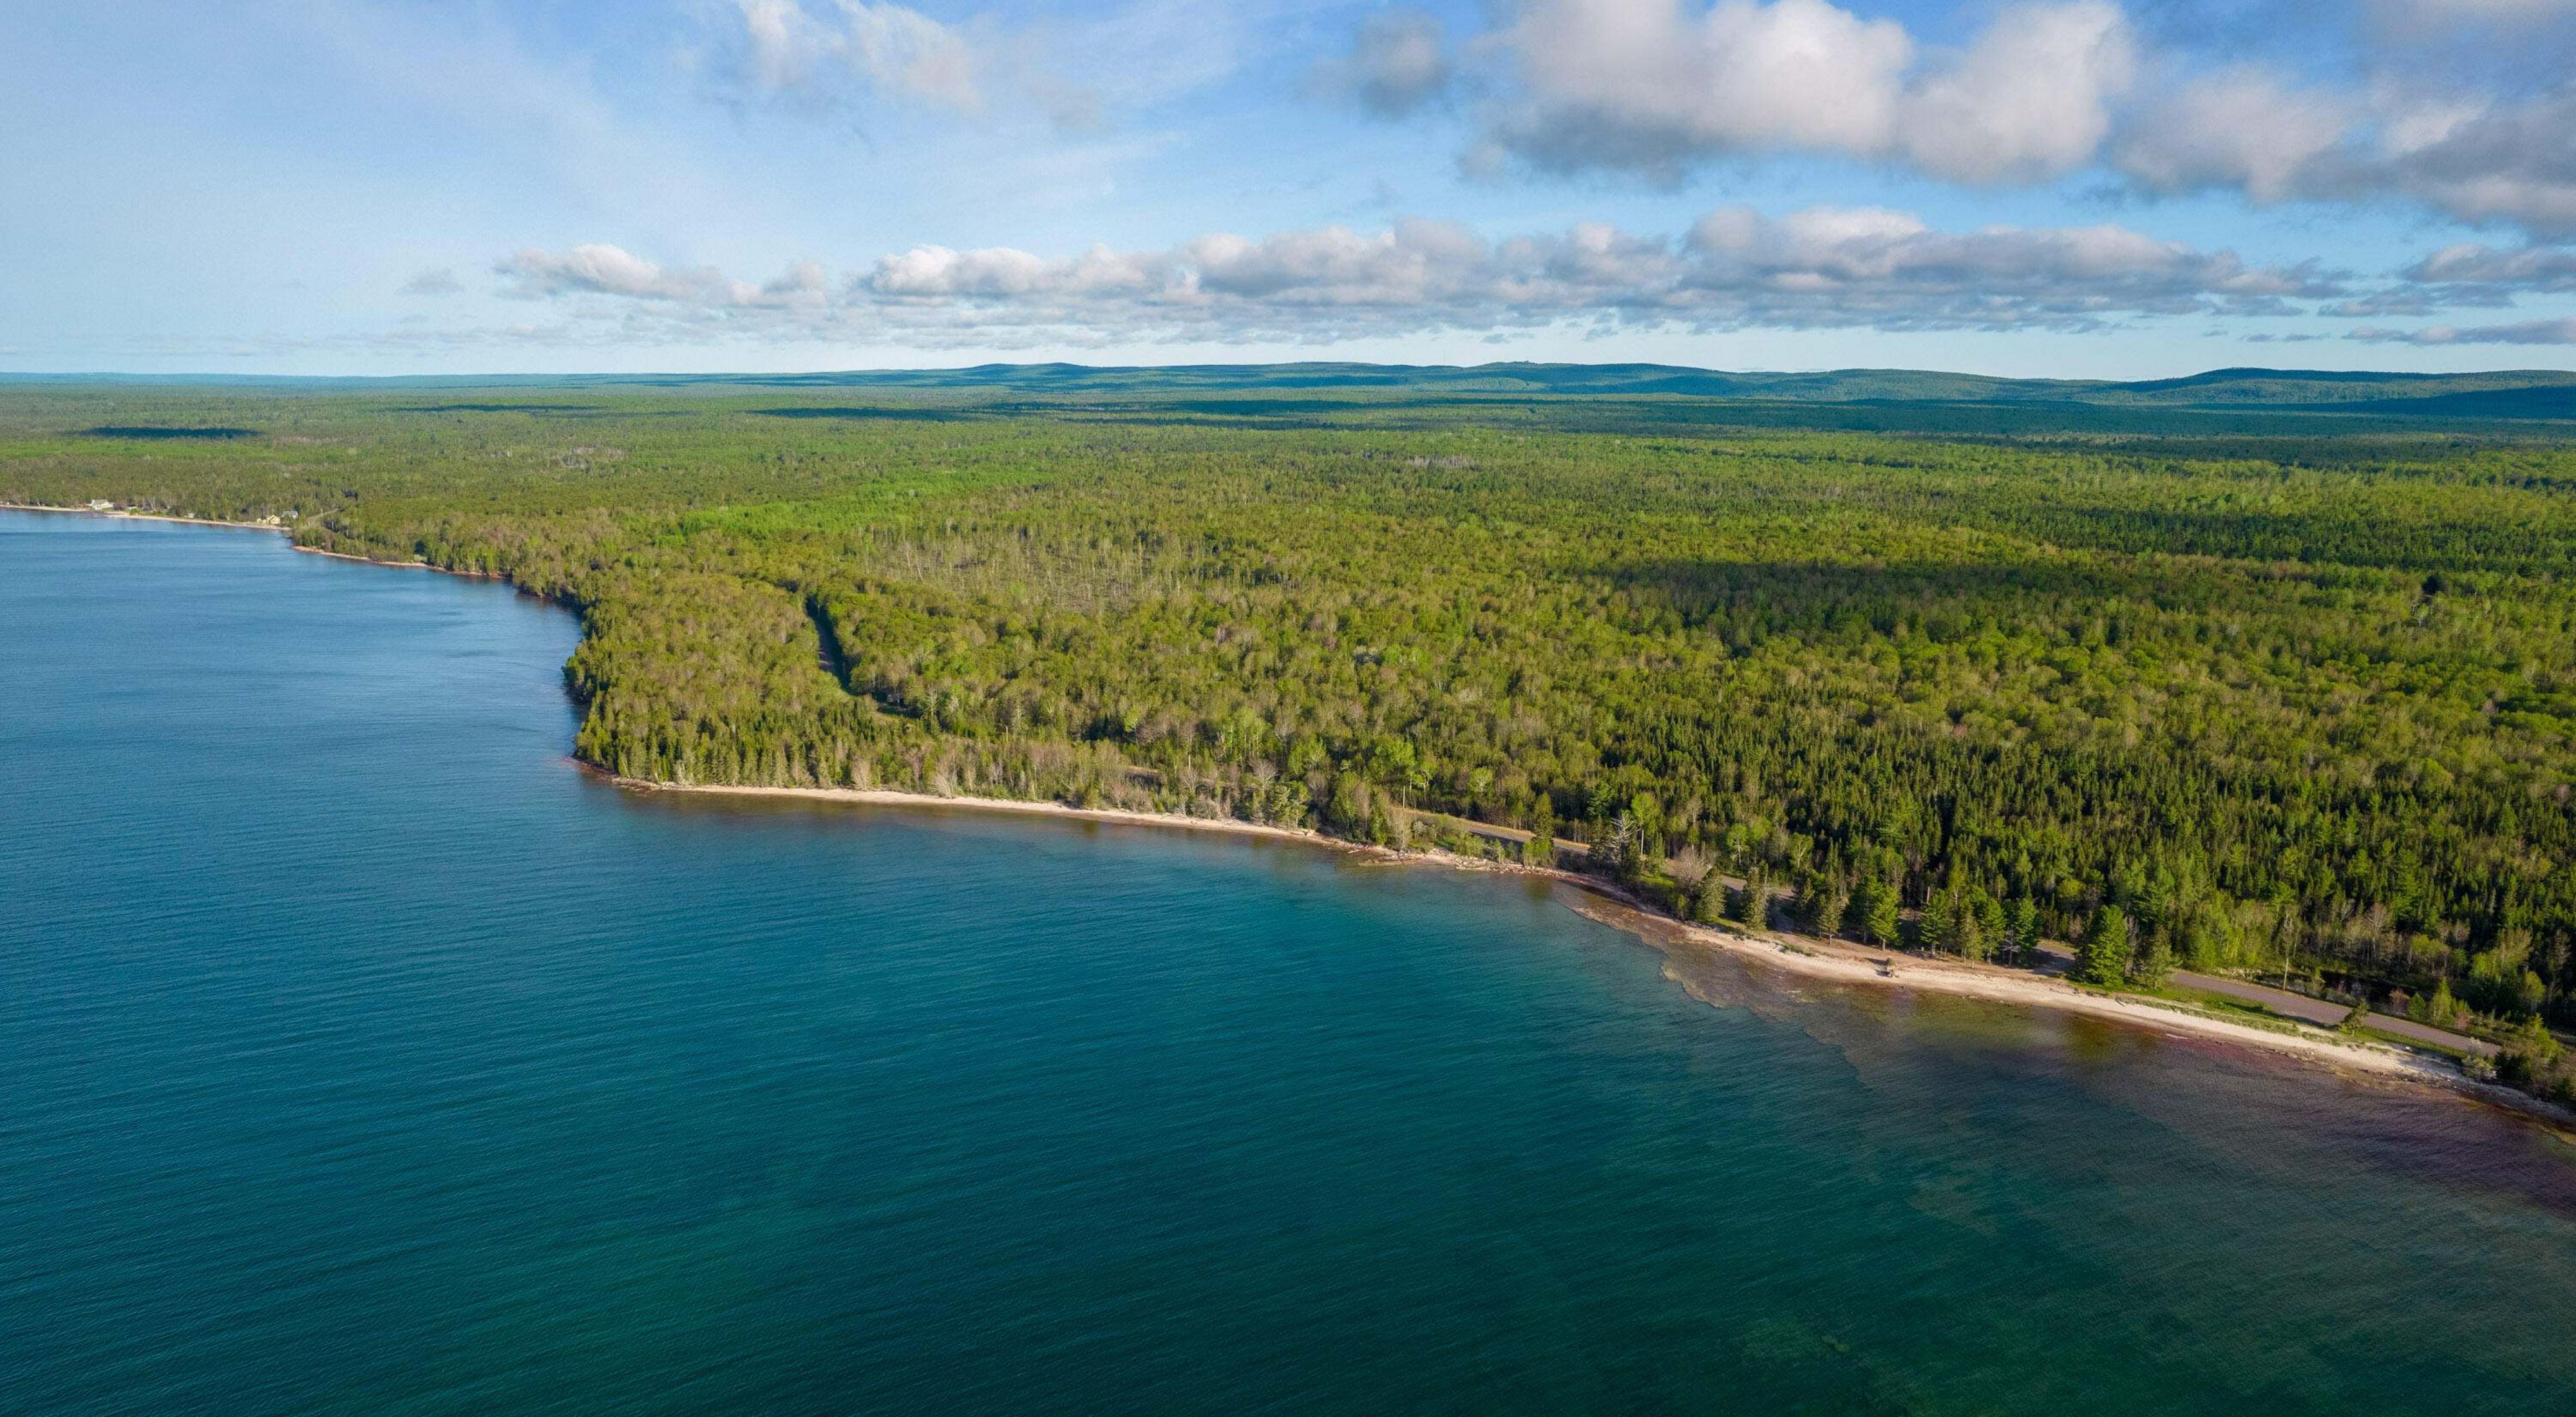  The Little Betsy Shoreline on a clear day. The water of Lake Superior is a bright blue and a vast forest extends from the shore.